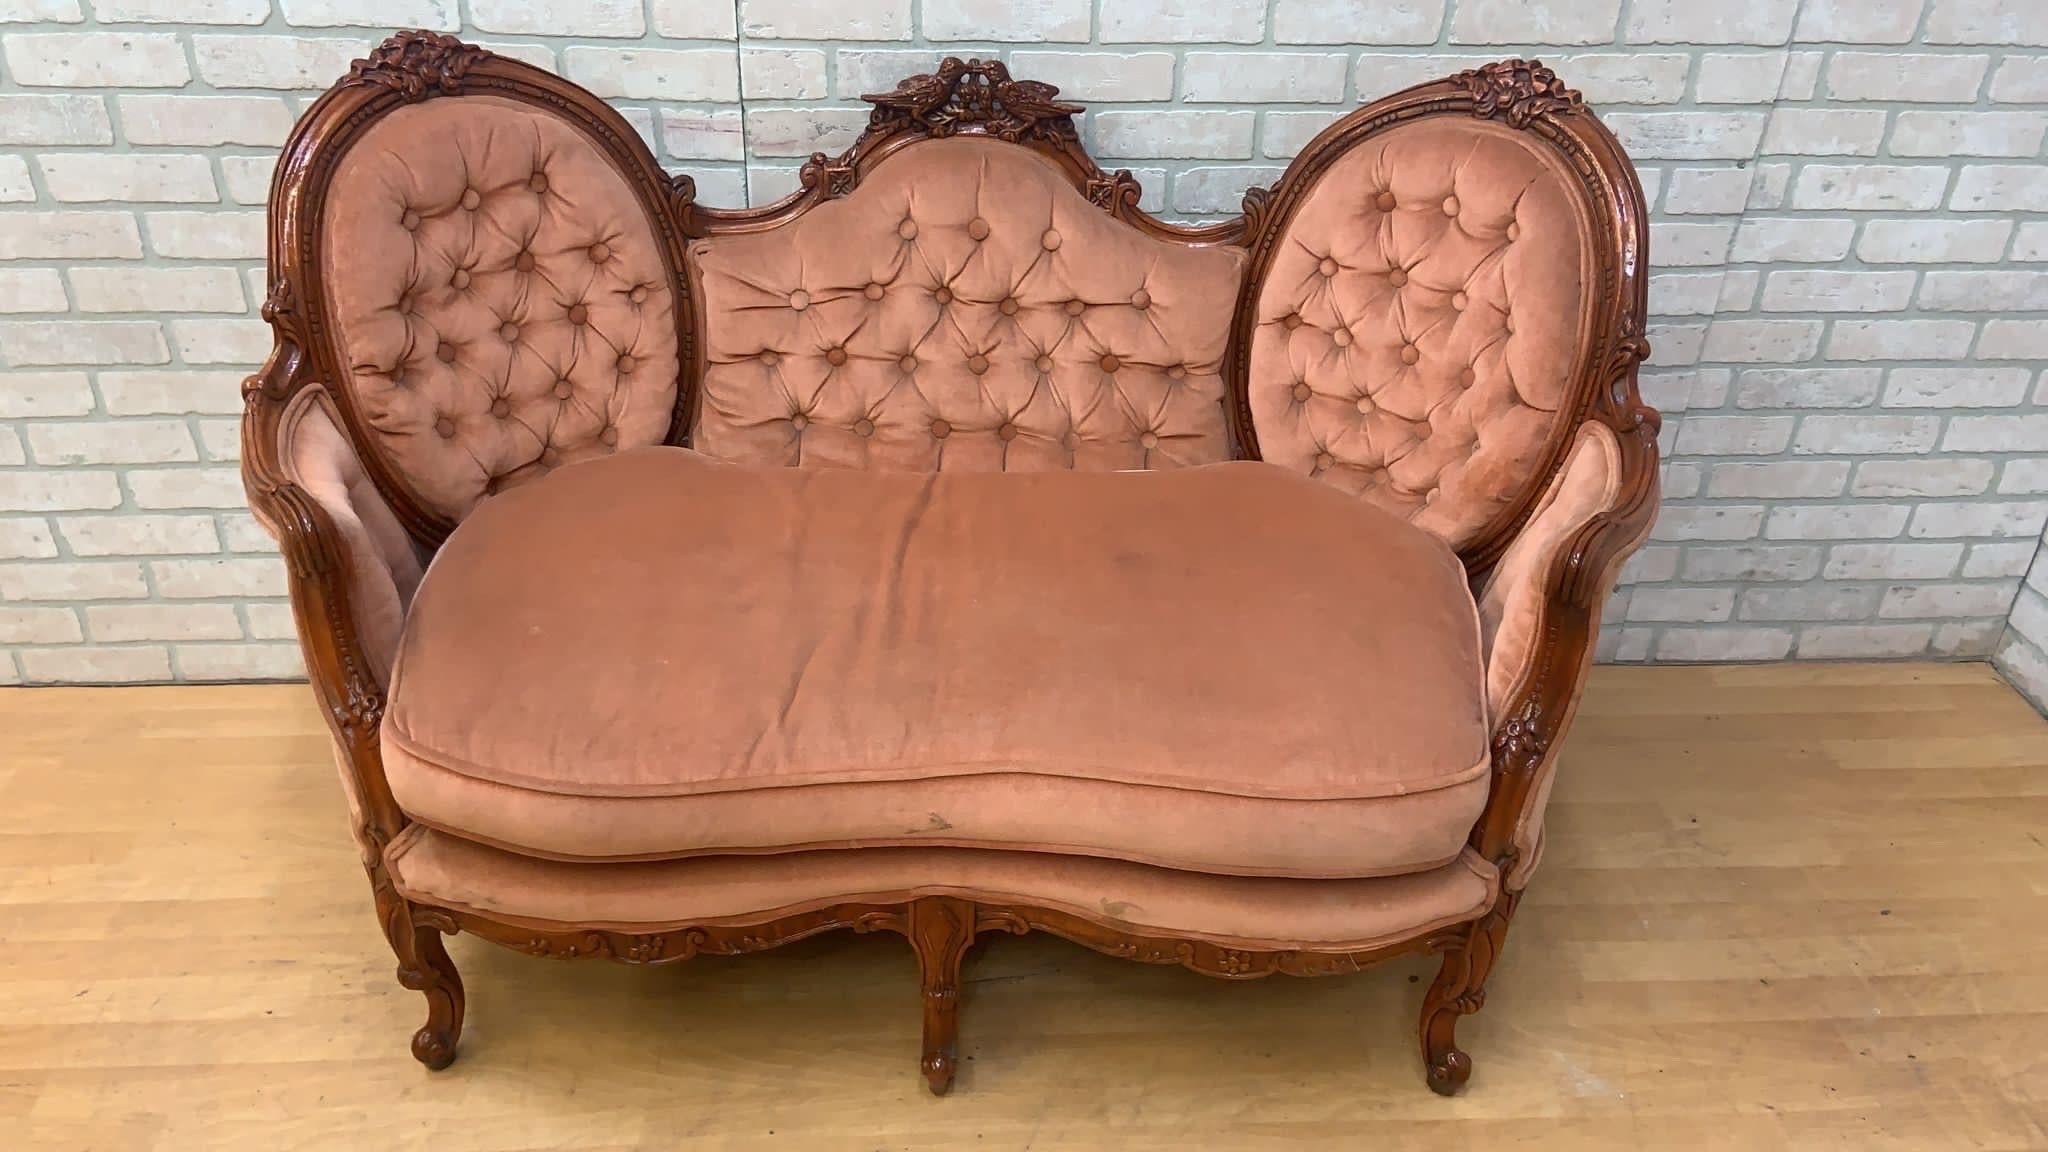 Antique French Provincial Bird Motif Mahogany Setee in Original Blush Velvet In Good Condition For Sale In Chicago, IL